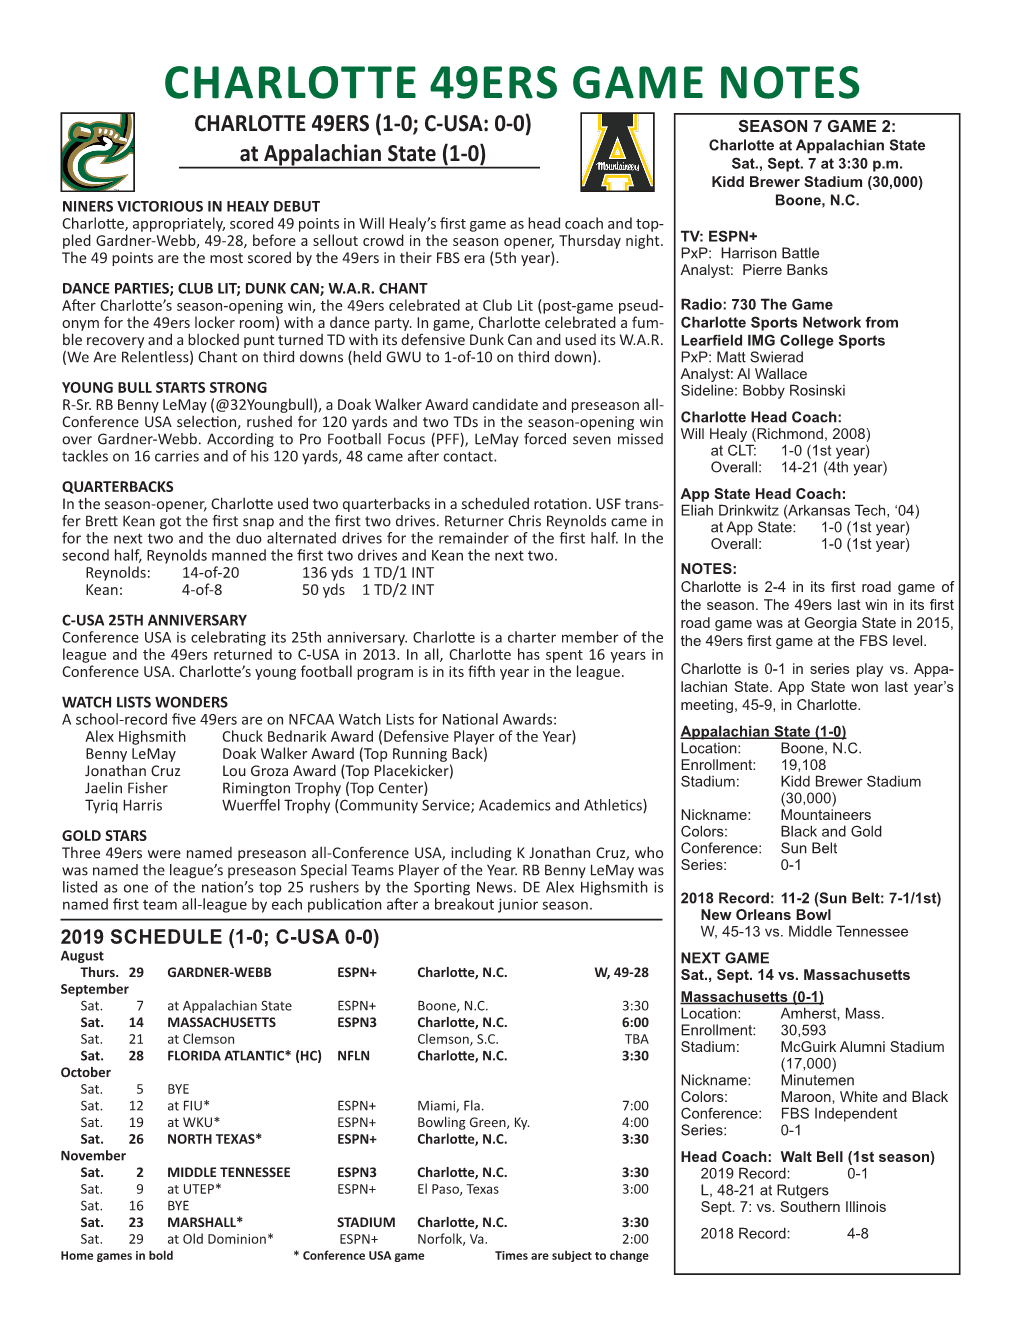 CHARLOTTE 49ERS GAME NOTES CHARLOTTE 49ERS (1-0; C-USA: 0-0) SEASON 7 GAME 2: Charlotte at Appalachian State at Appalachian State (1-0) Sat., Sept